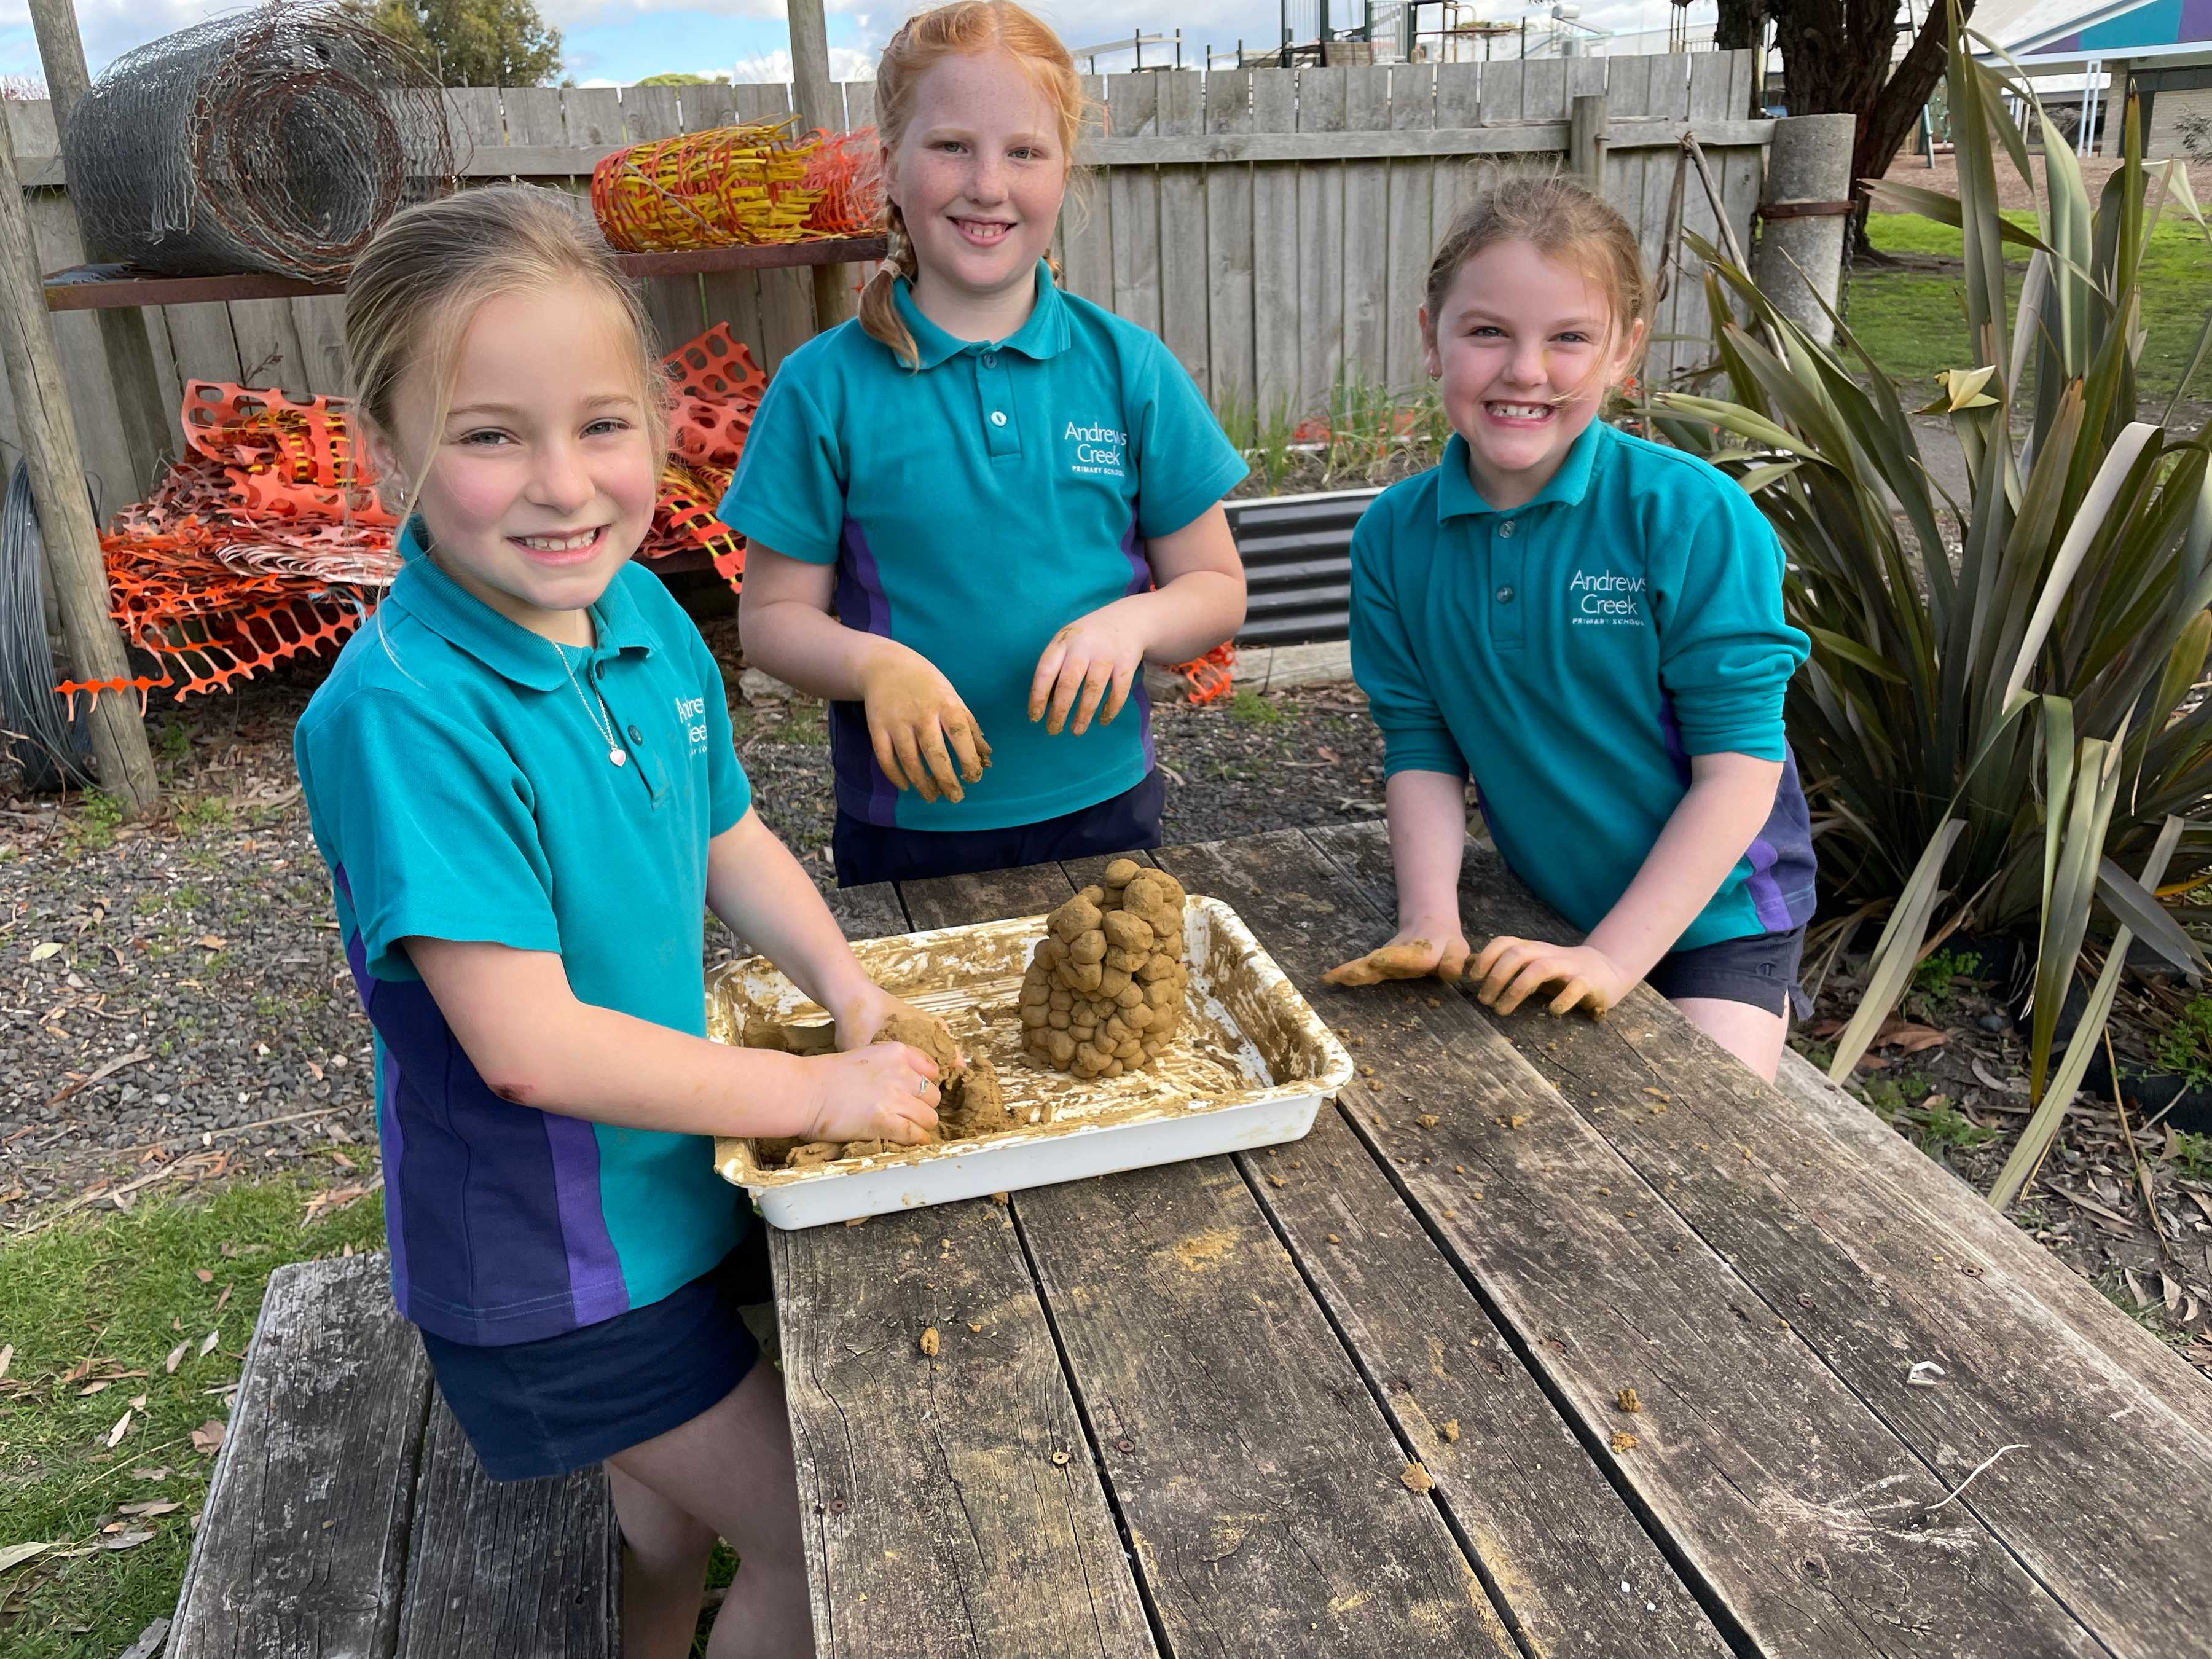 Three students from Andrews Creek Primary School pose with a model of a burrowing crayfish chimney which they have just created out of clay, in a white tray on a wooden picnic table, in an outside garden area. Photo: Clare Hawkins.